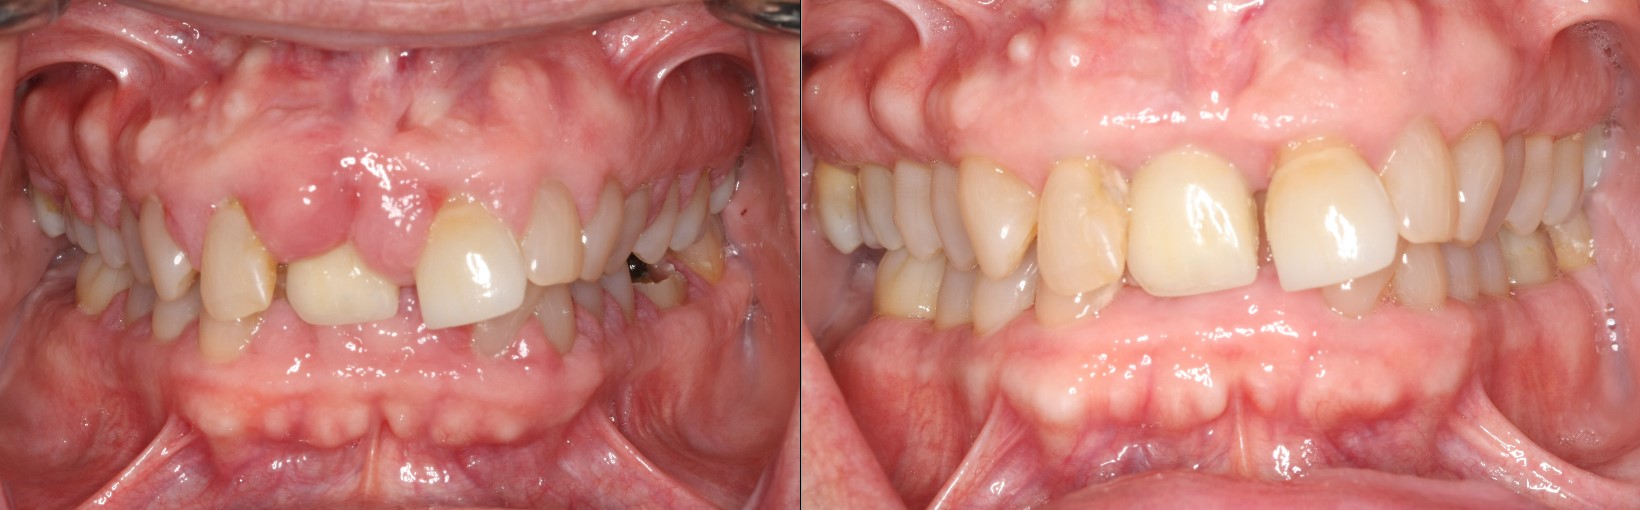 Before and After Treatment for Gingival Hyperplasia and Discontinuation of a Calcium Channel Blocker